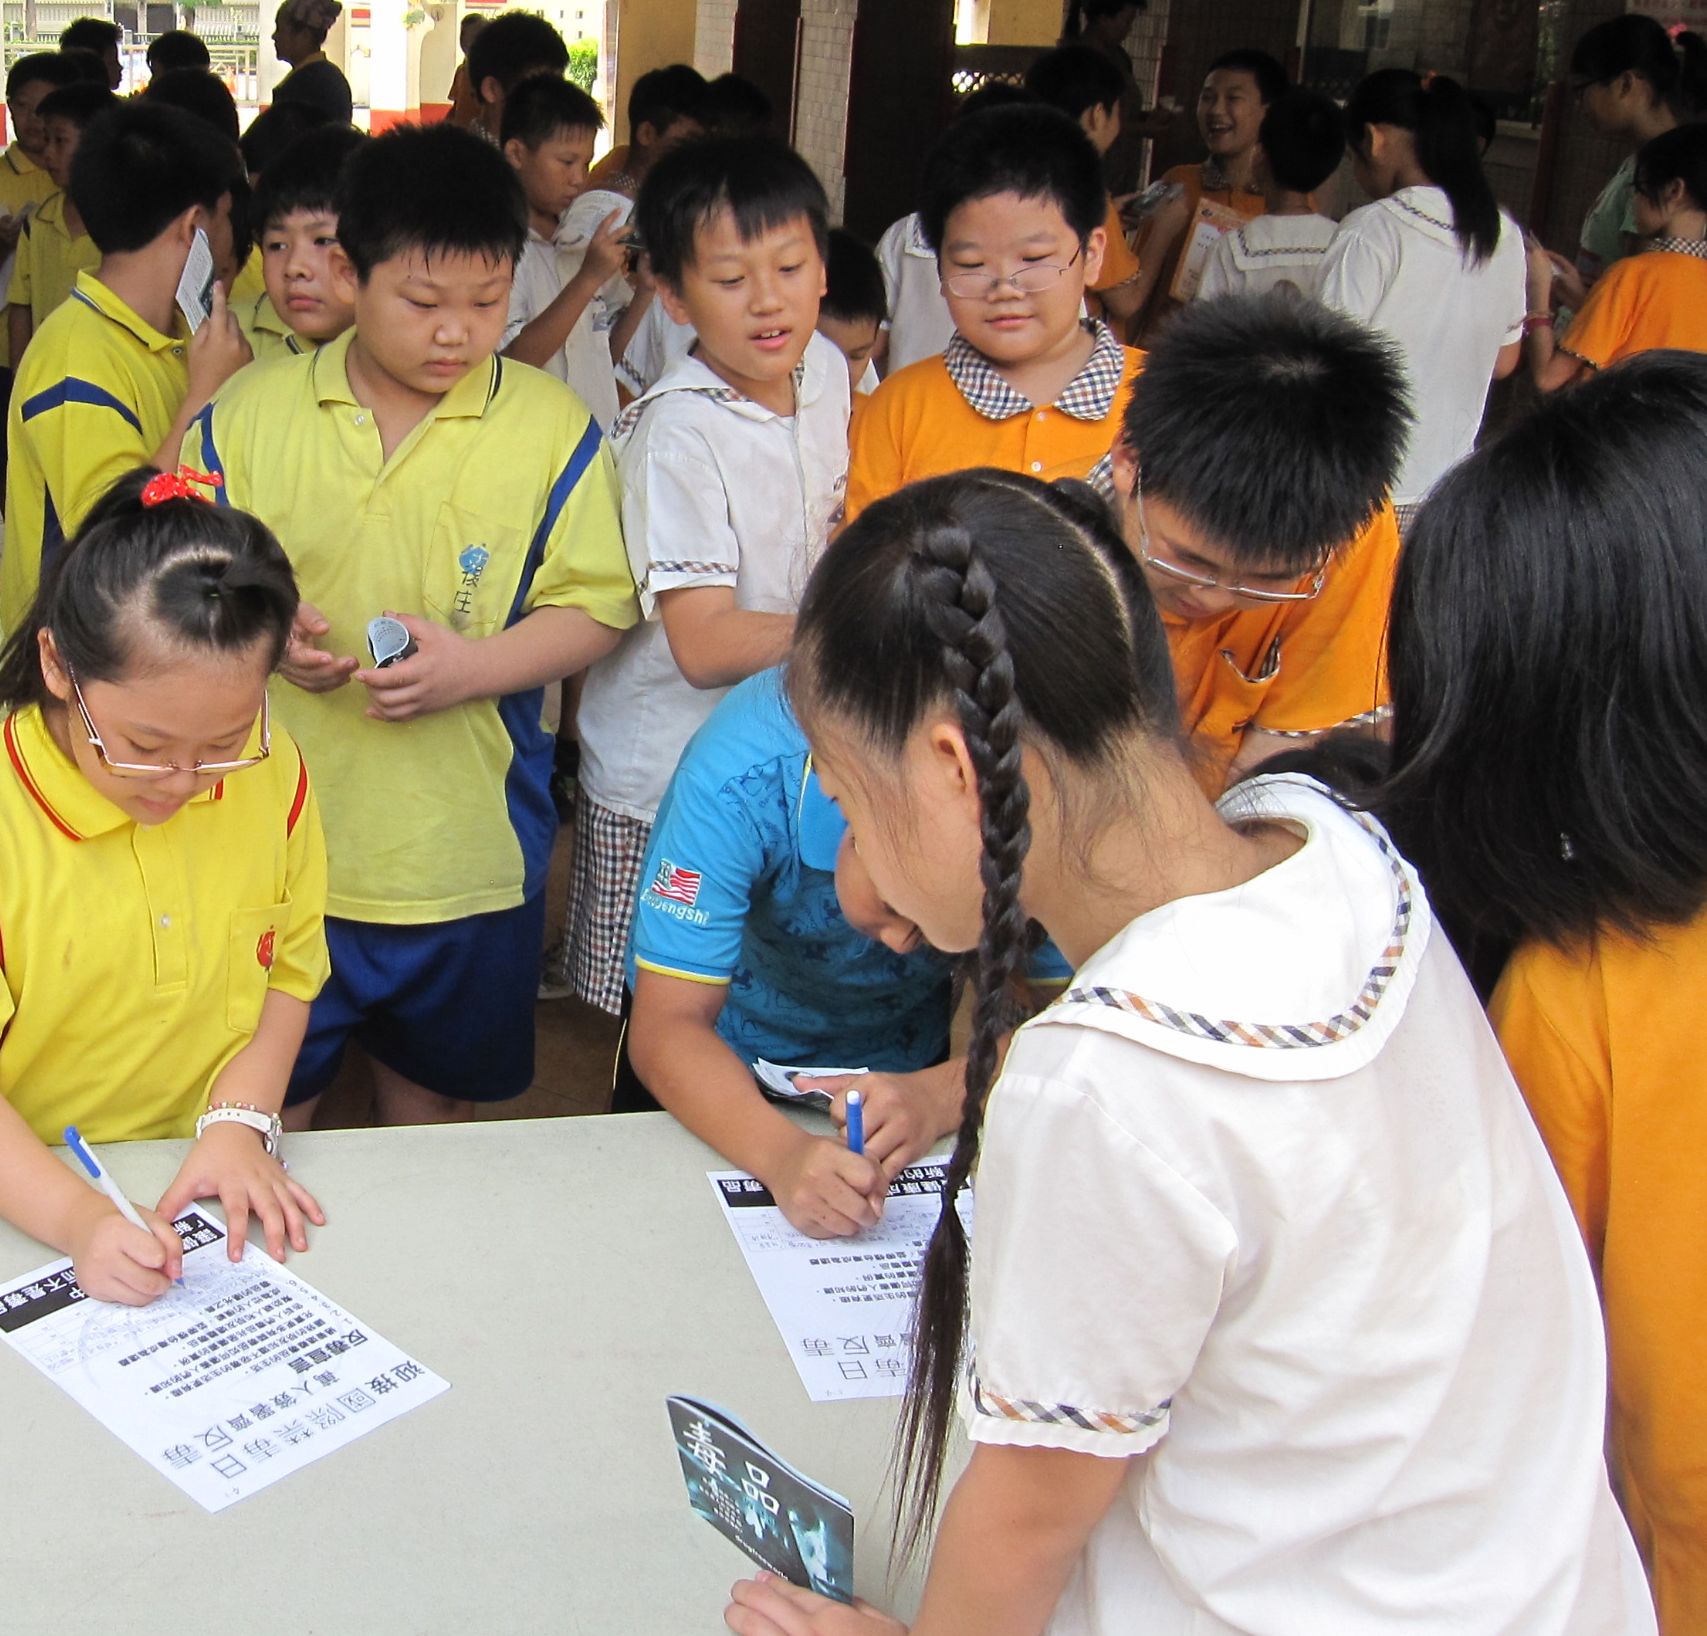 Gyugong Elementary School pupils sign a drug-free pledge, in a program organized by the Church of Scientology of Kaohsiung.